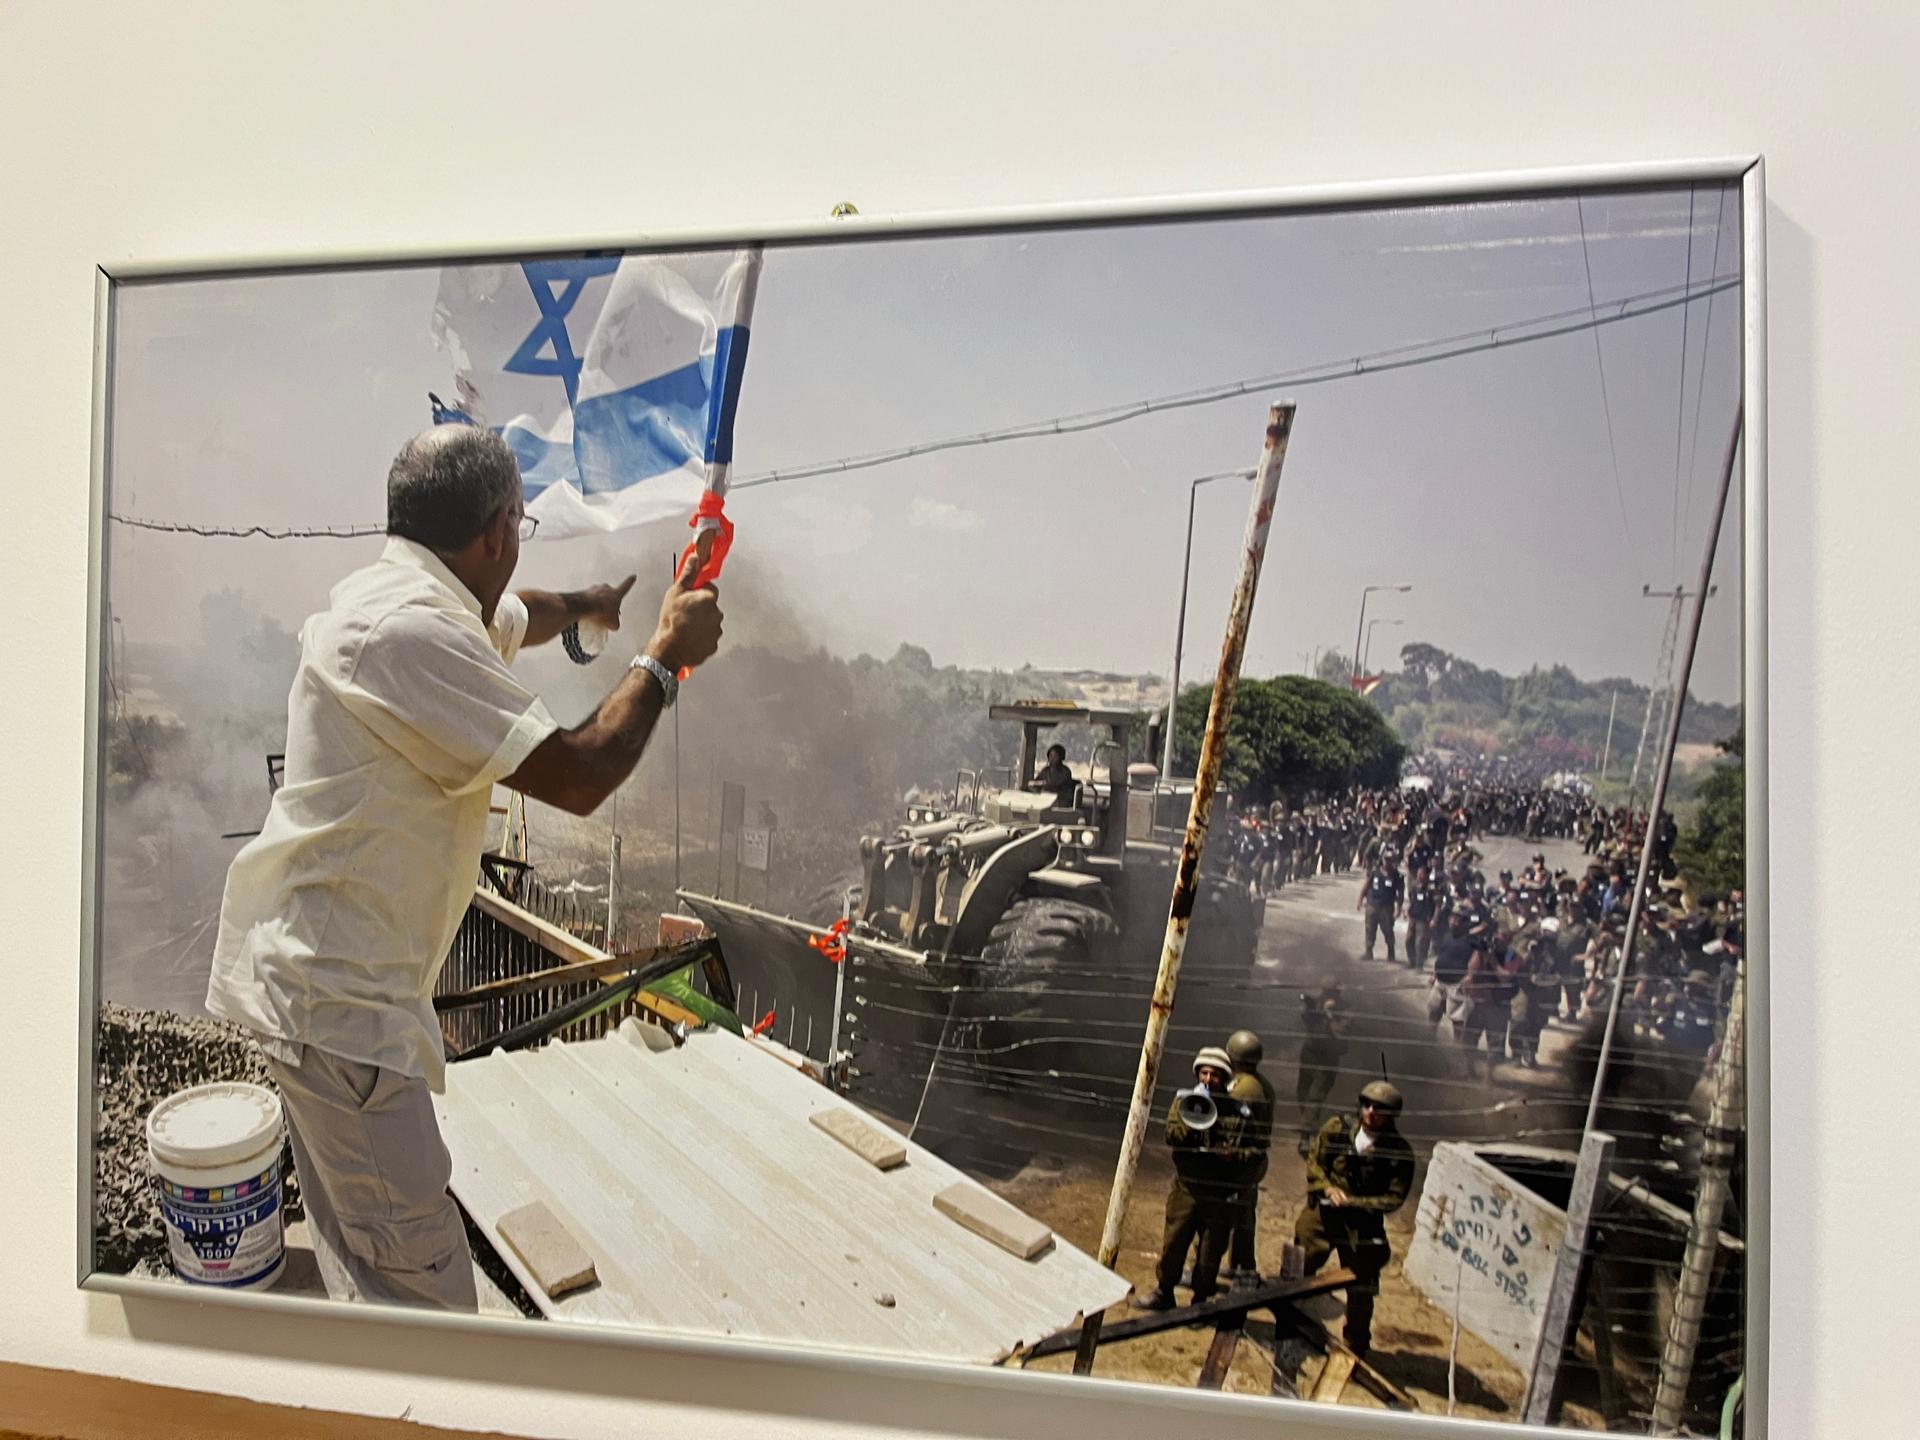 Photos in the Gush Katif Museum show Israel’s 2005 withdrawal from Gaza.